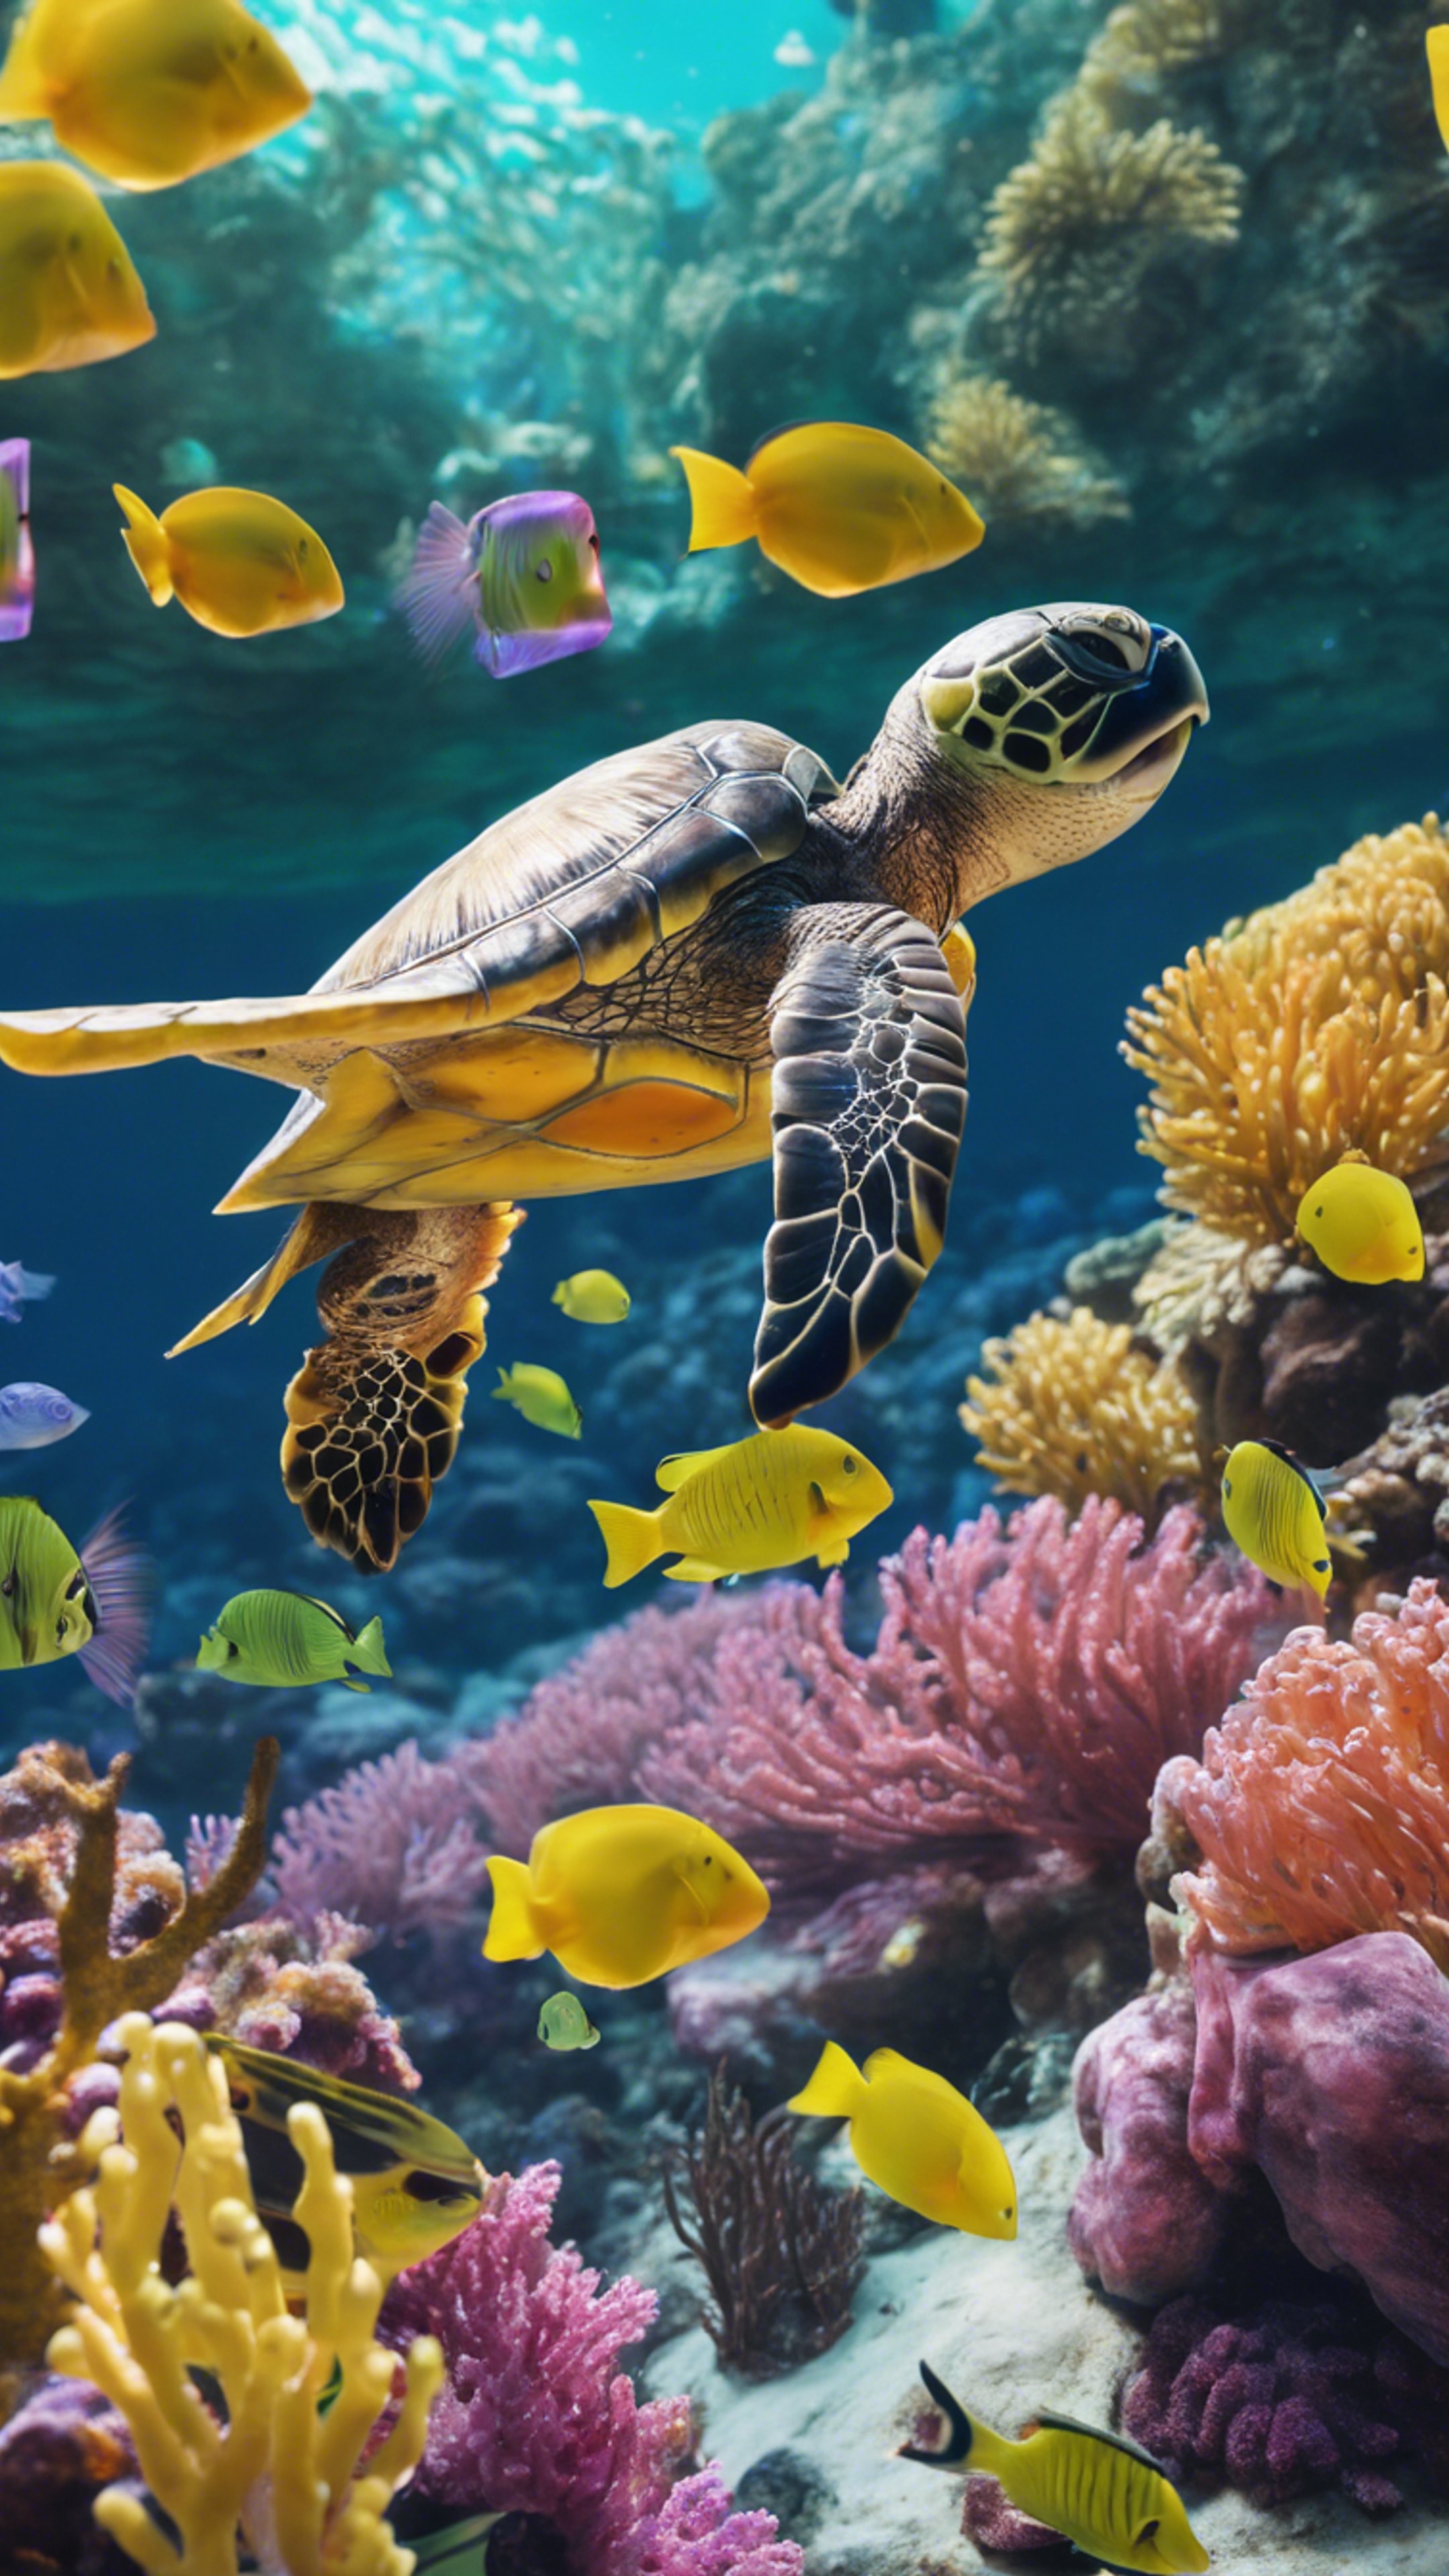 A sea turtle curiously interacting with colorful fishes in a reef. Wallpaper[2bbd294c31244e90b849]